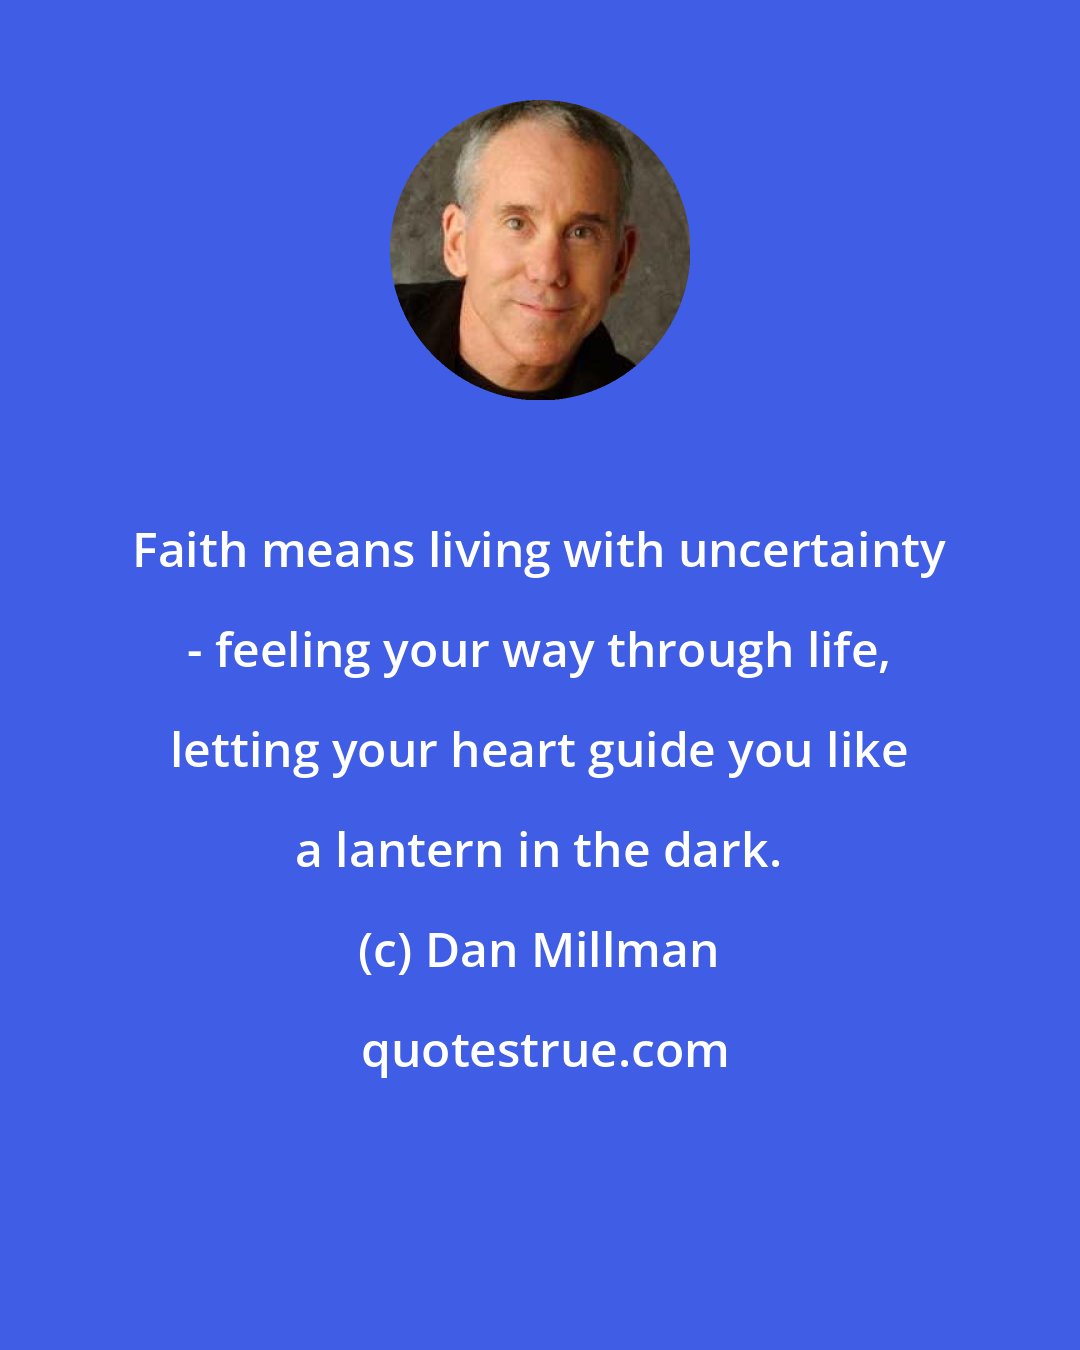 Dan Millman: Faith means living with uncertainty - feeling your way through life, letting your heart guide you like a lantern in the dark.